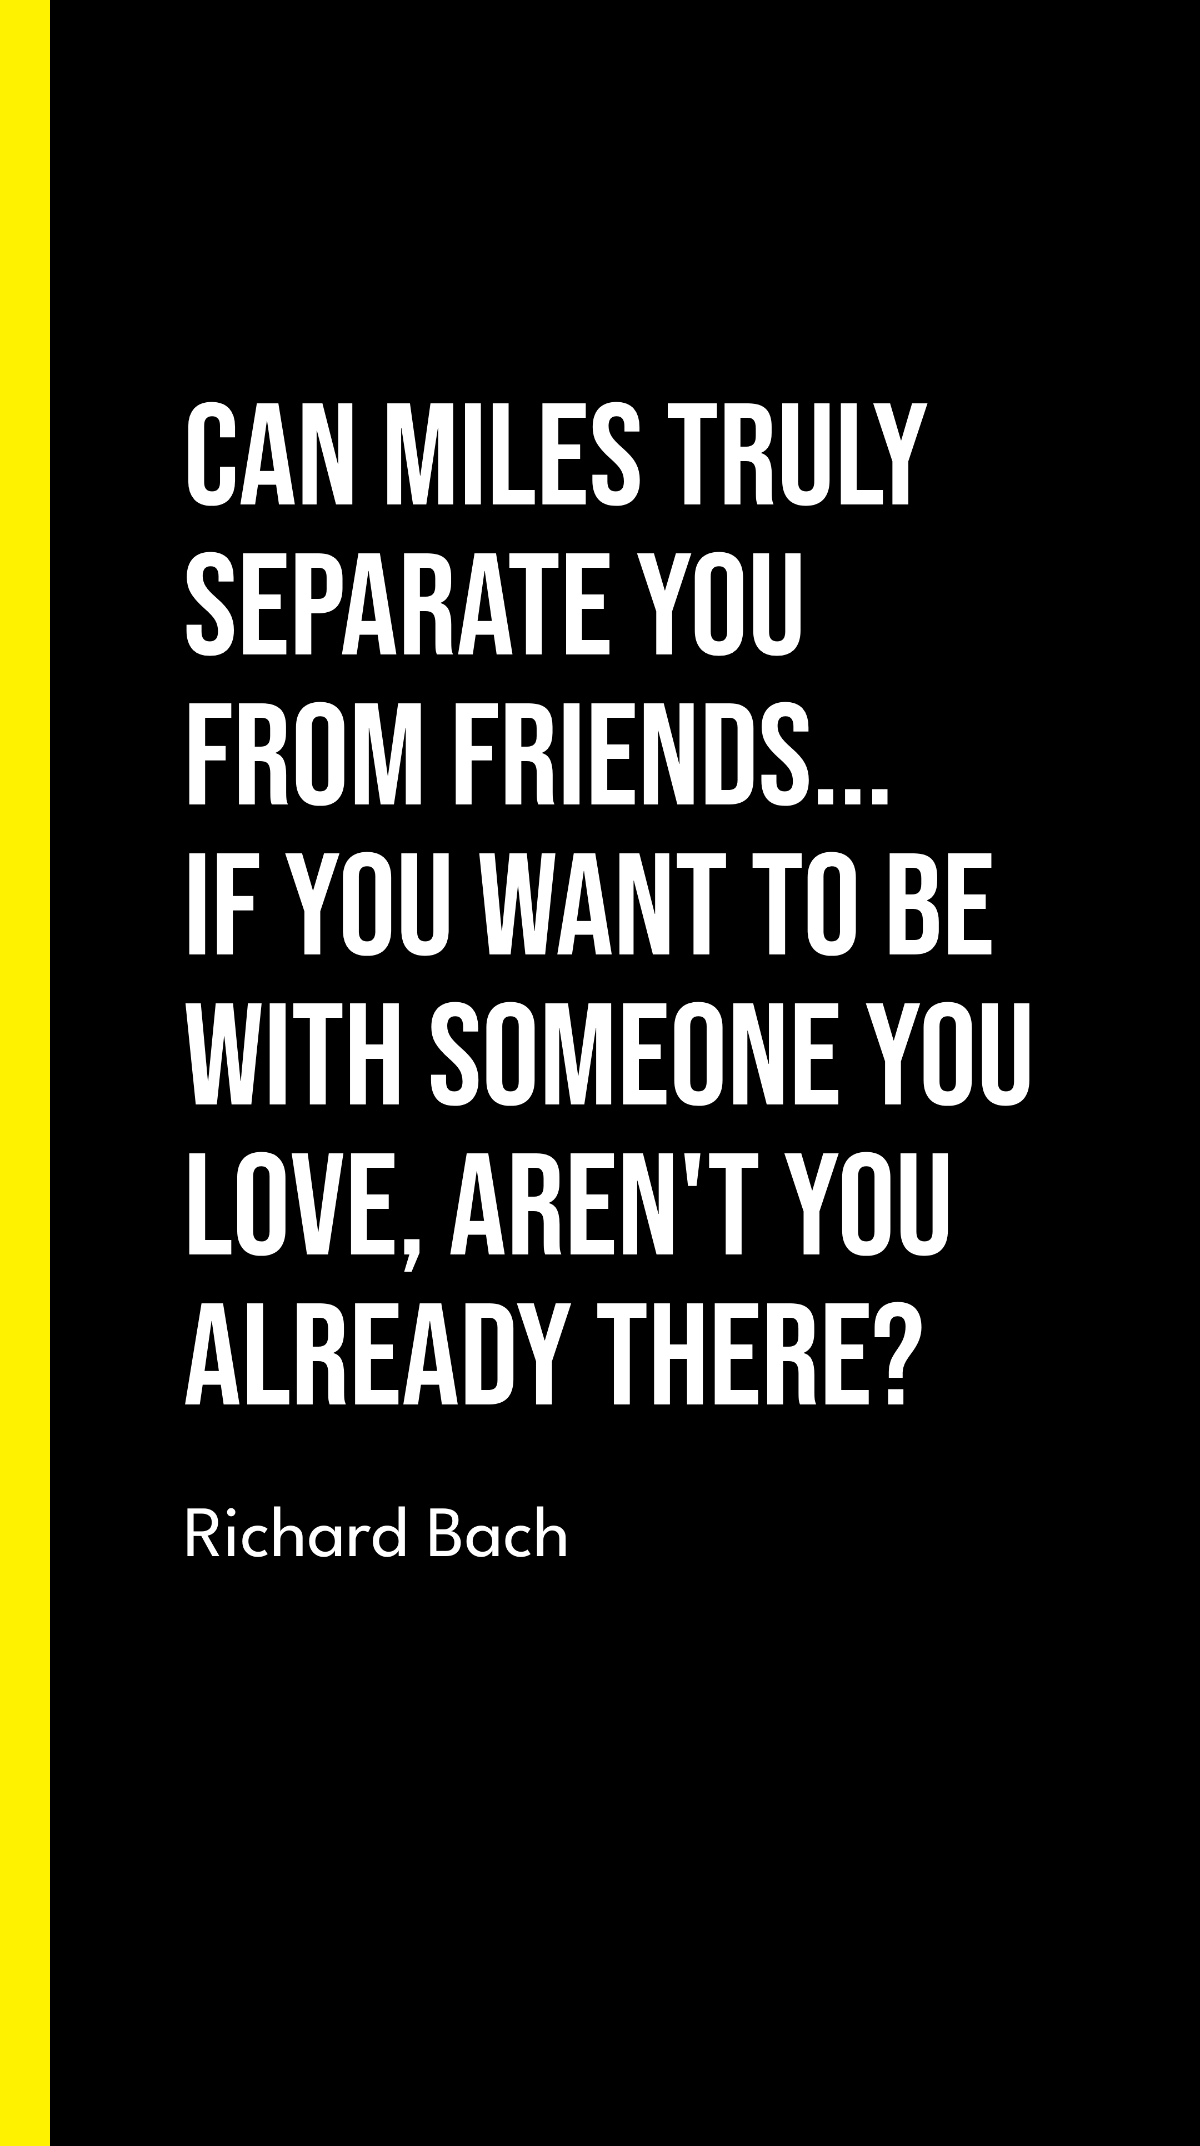 Richard Bach - Can miles truly separate you from friends... If you want to be with someone you love, aren't you already there? Template